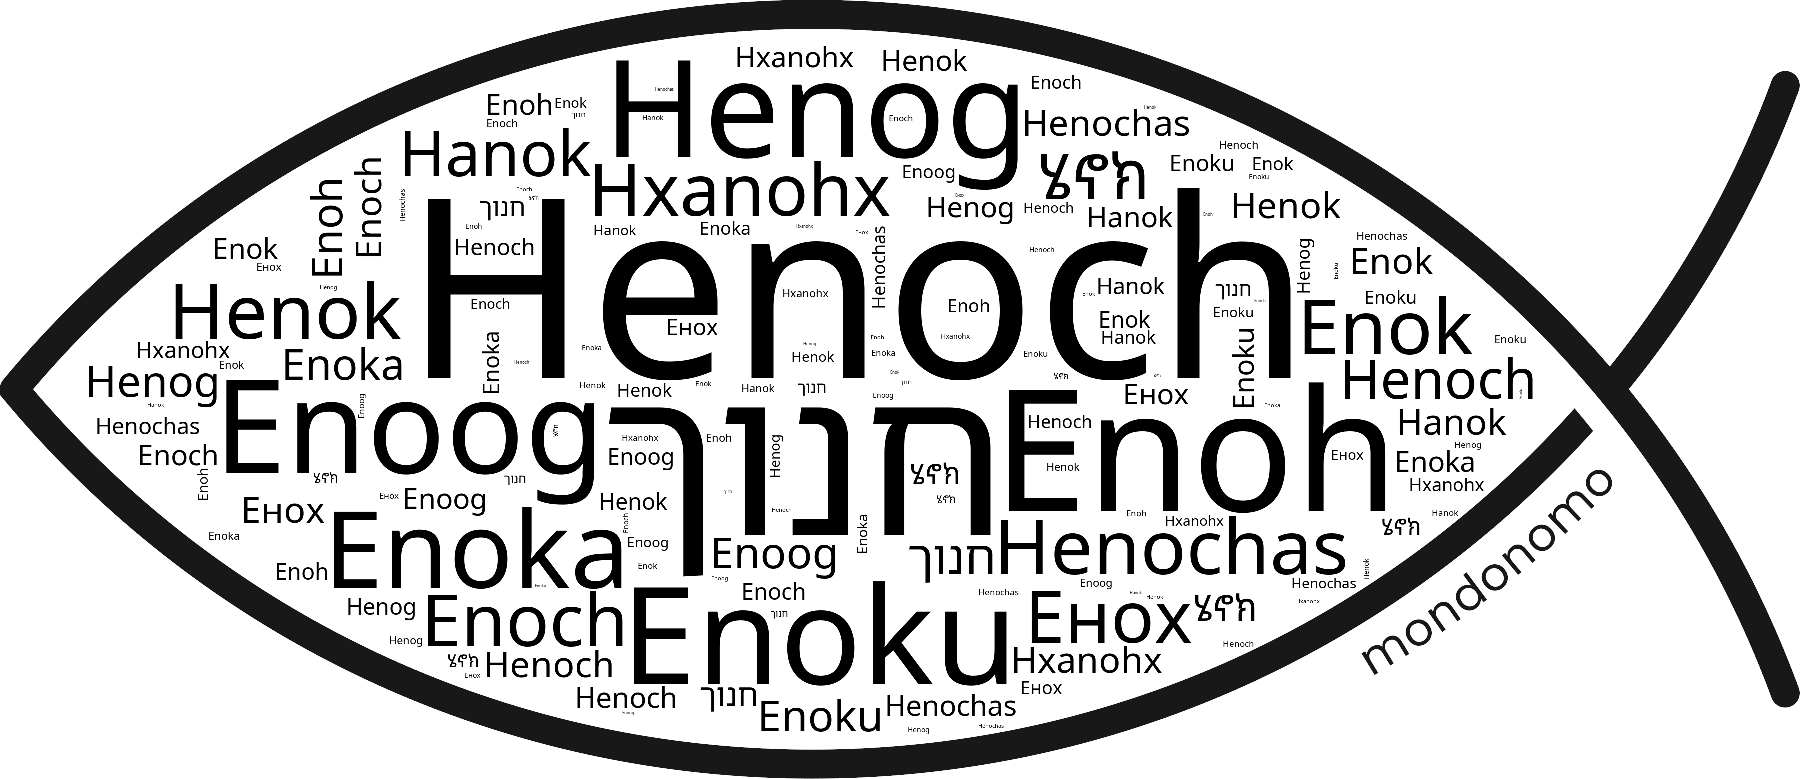 Name Henoch in the world's Bibles